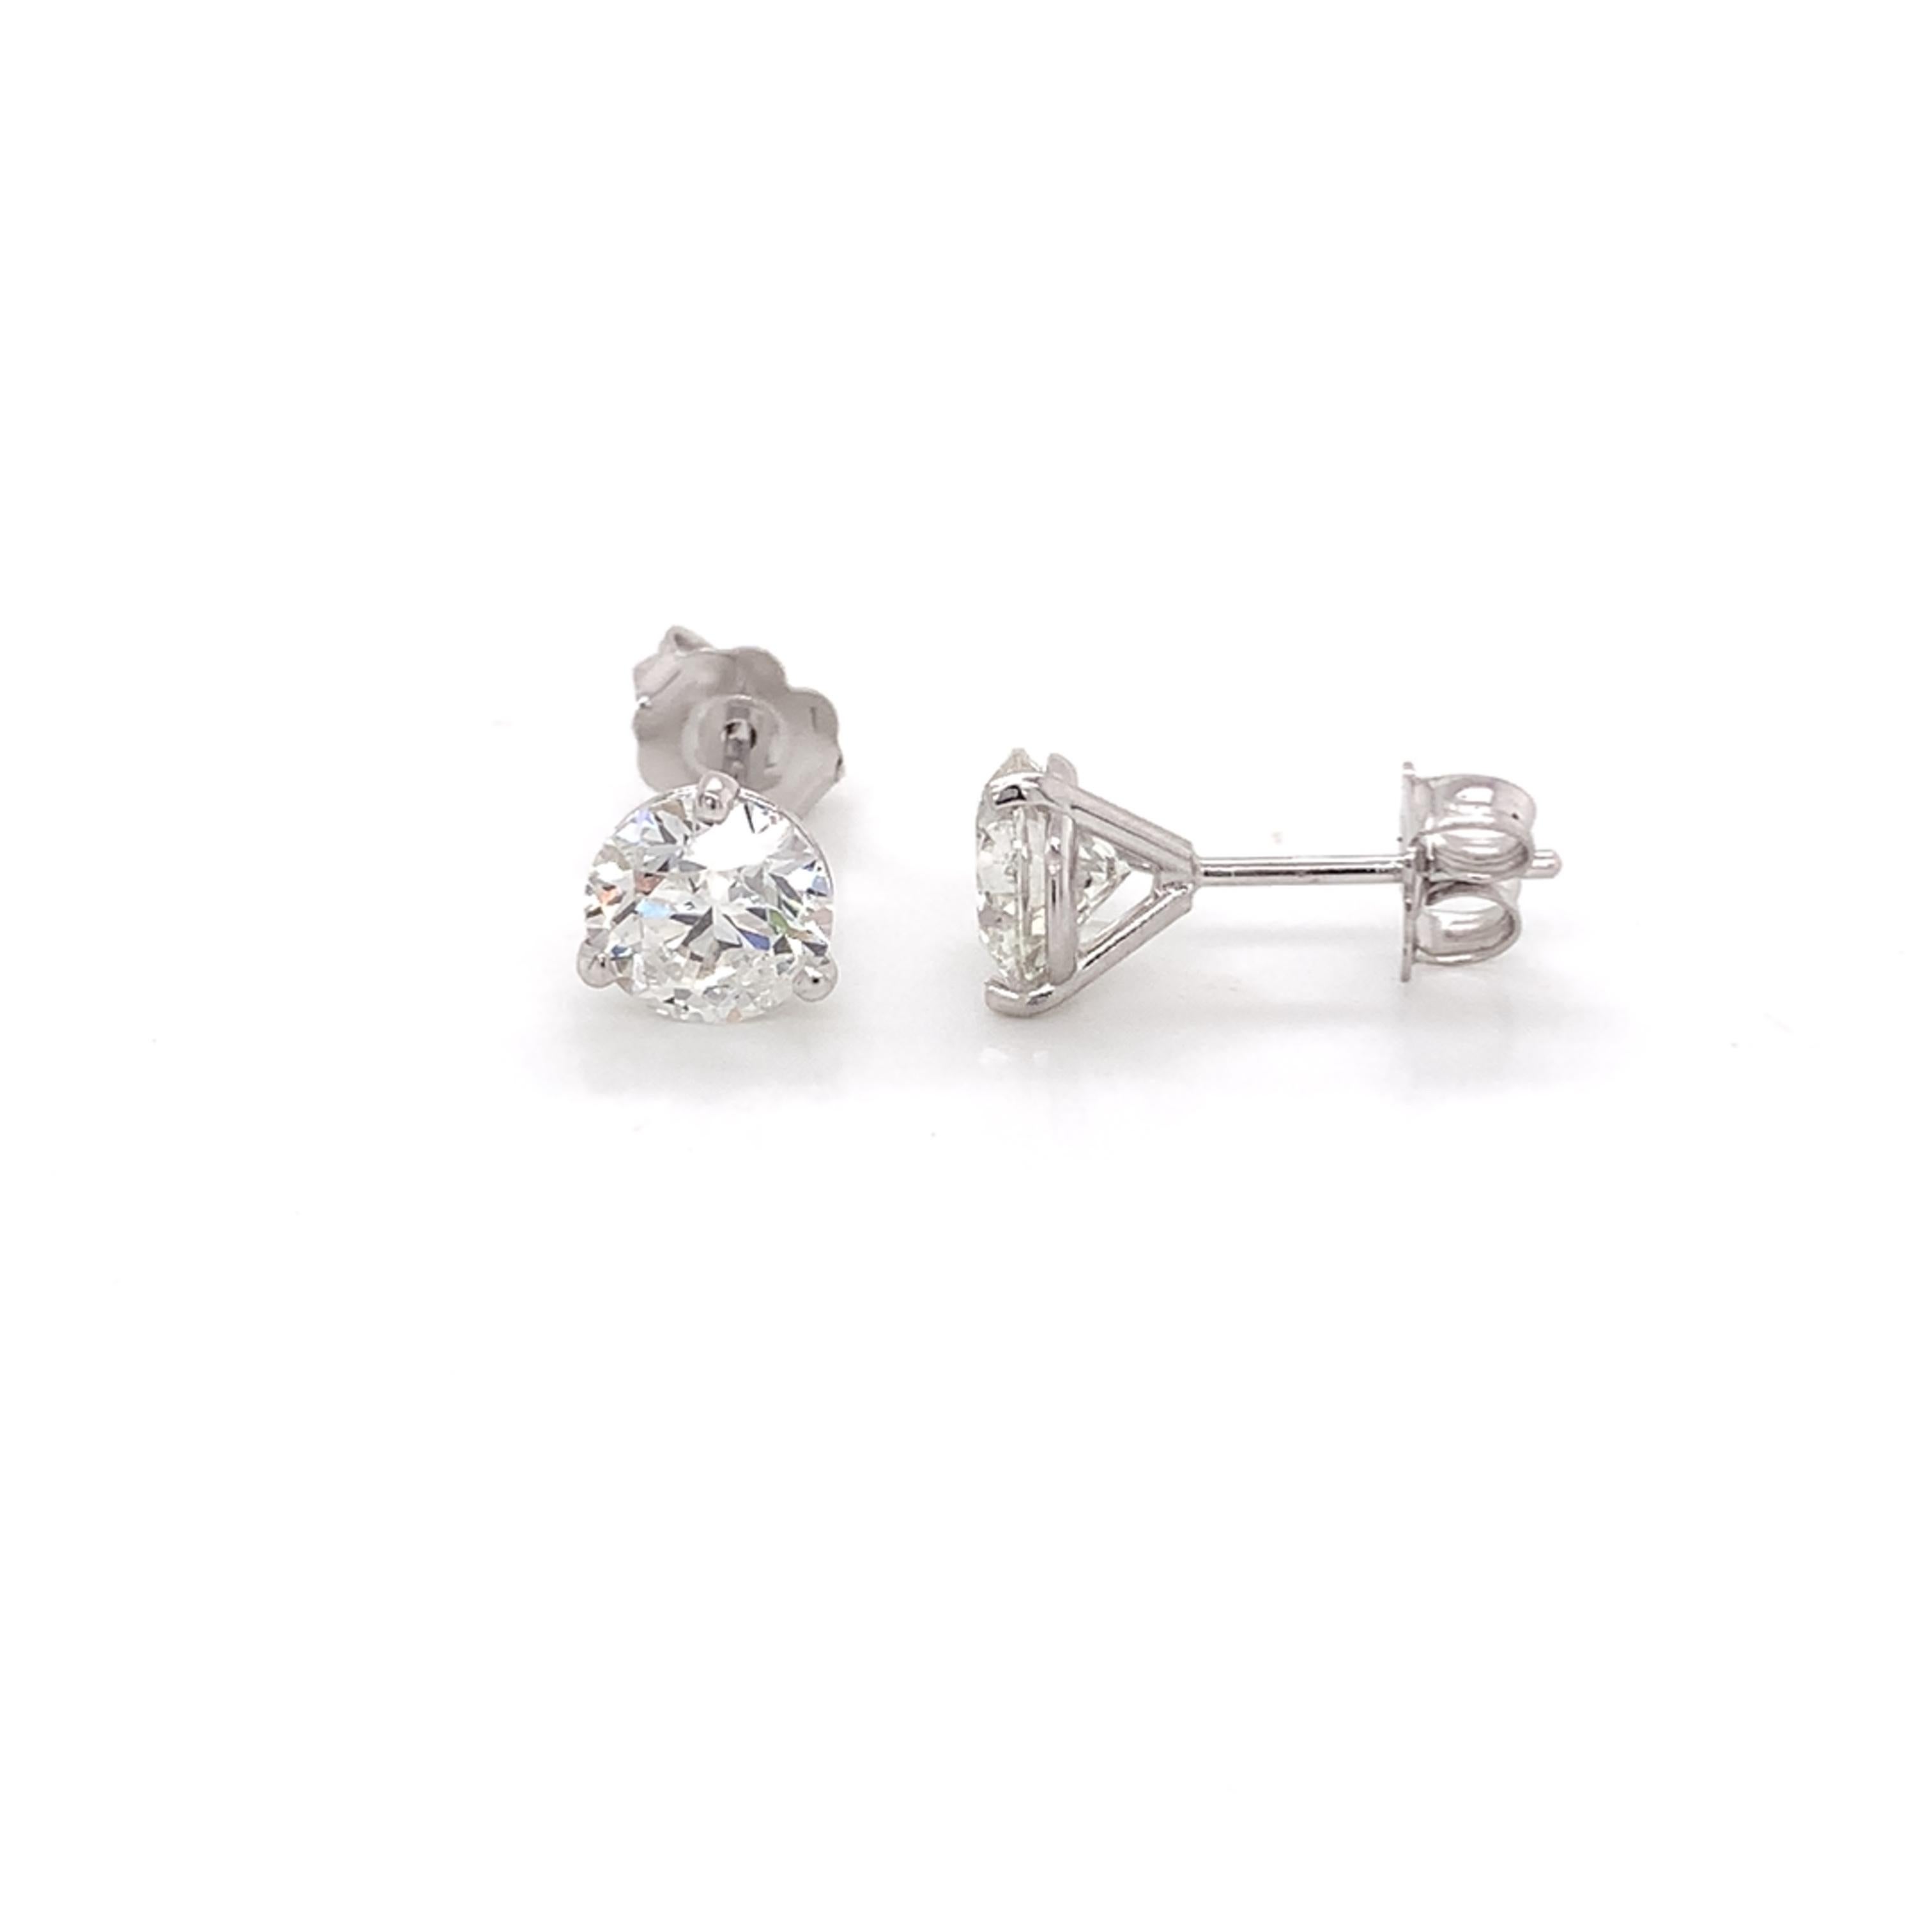 Diamond stud earrings made with real/natural brilliant cut diamonds. Total Diamond Weight: 2.04 carats. Diamond Quantity: 2 round diamonds. Color: H-I. Clarity: SI2-SI3. Mounted on 18kt white gold, push-back setting.